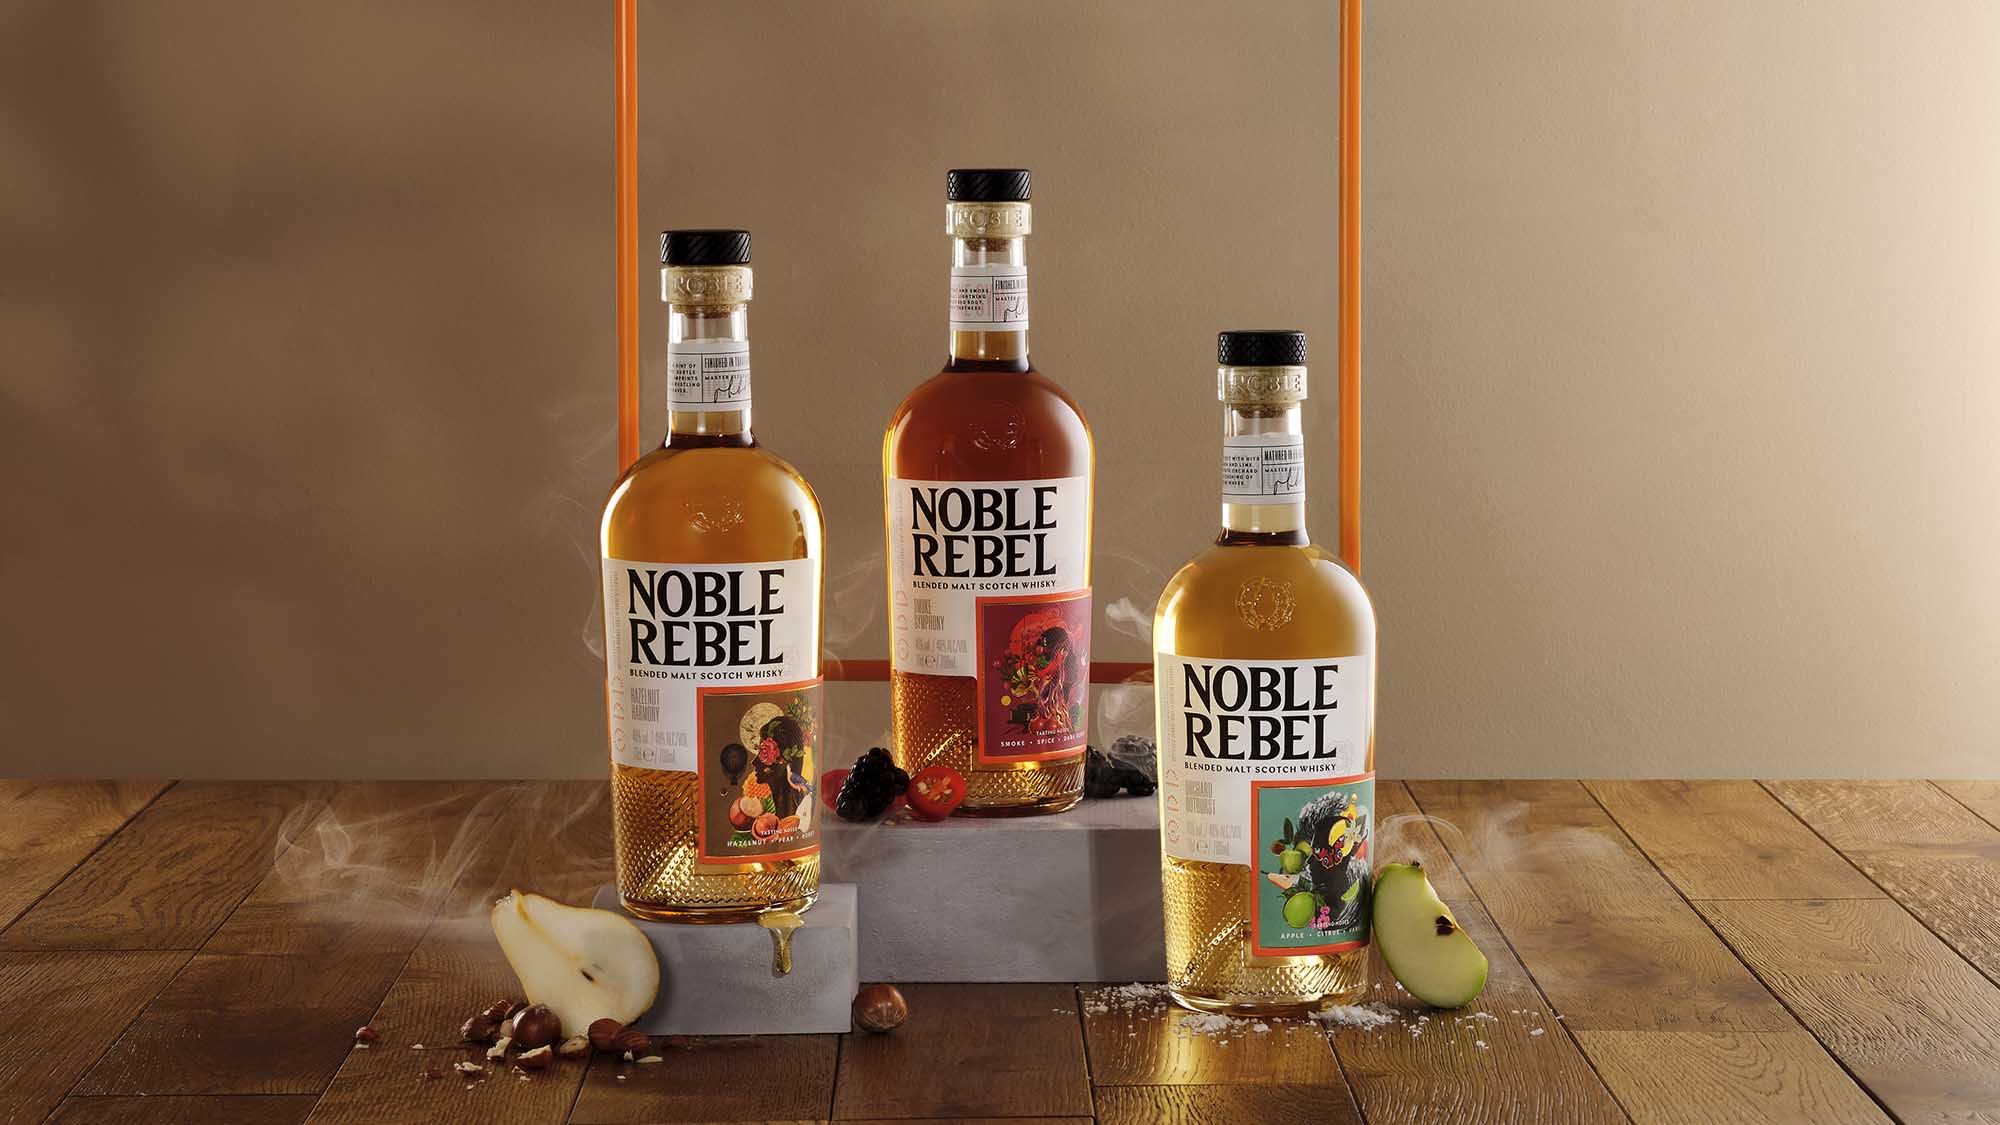 Loch Lomond Launches Noble Rebel Blended Whisky